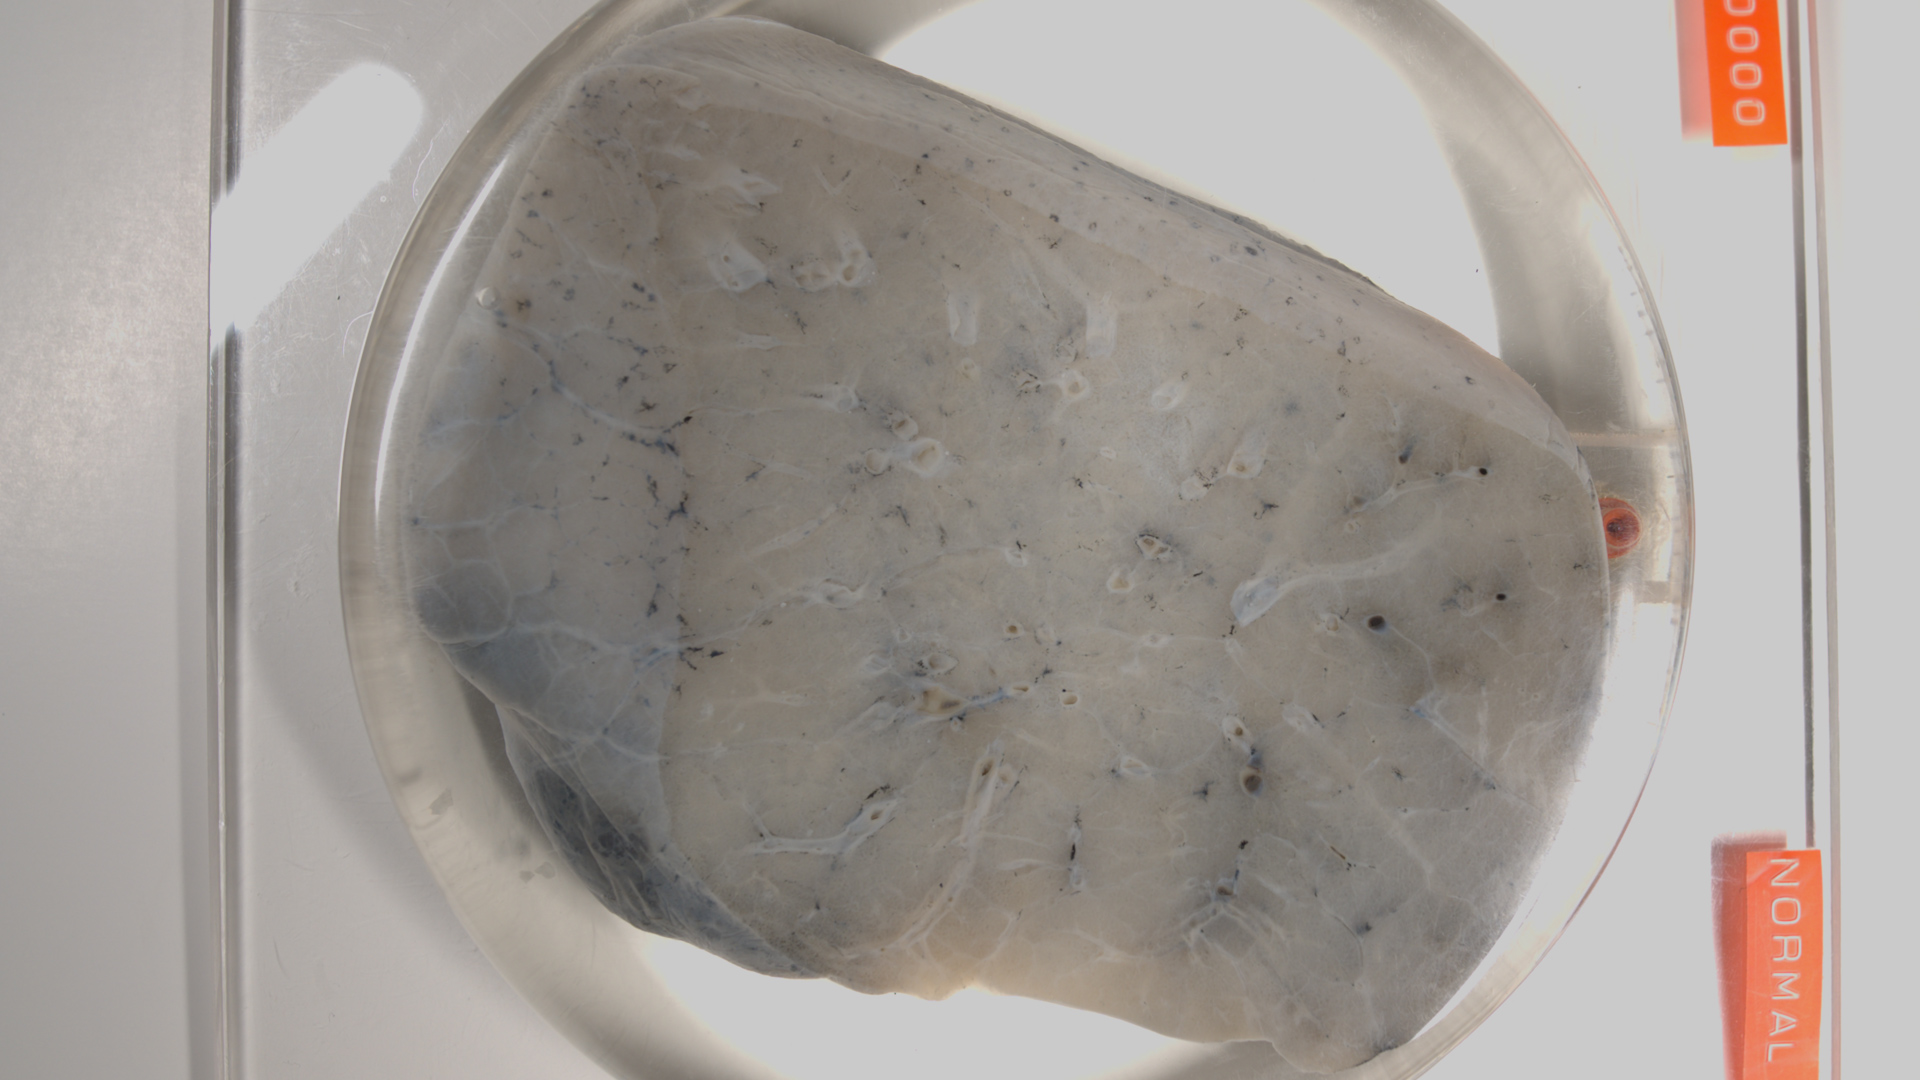 a section of normal lung is mounted. The blood is washed out so that it is a white/light gray in colour with black specks distributed diffusely. It looks like a fine sponge floating in clear liquid.